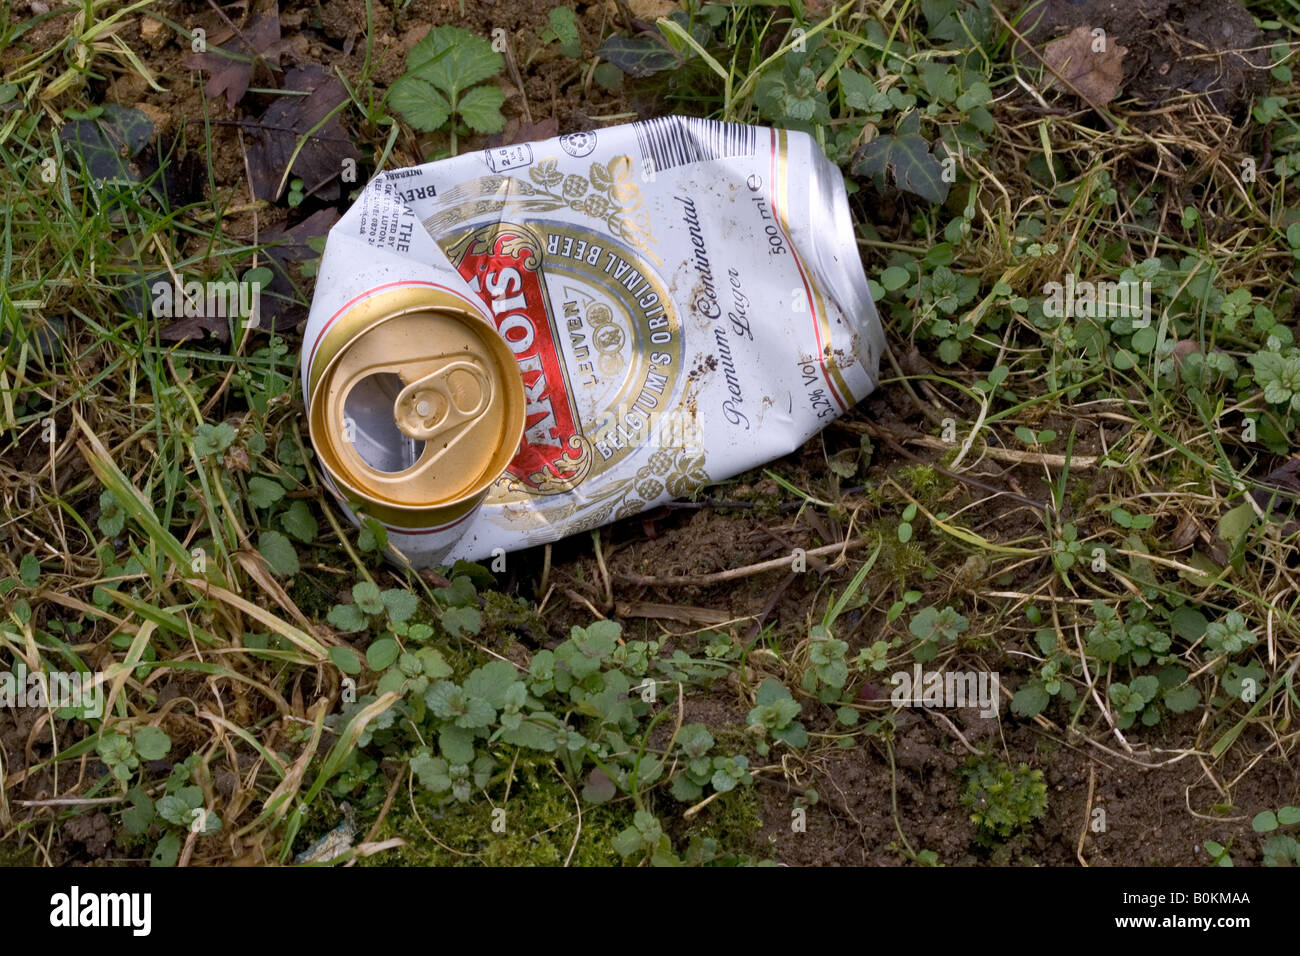 Discarded Stella Artois beer can Oxfordshire The Cotswolds United Kingdom Stock Photo